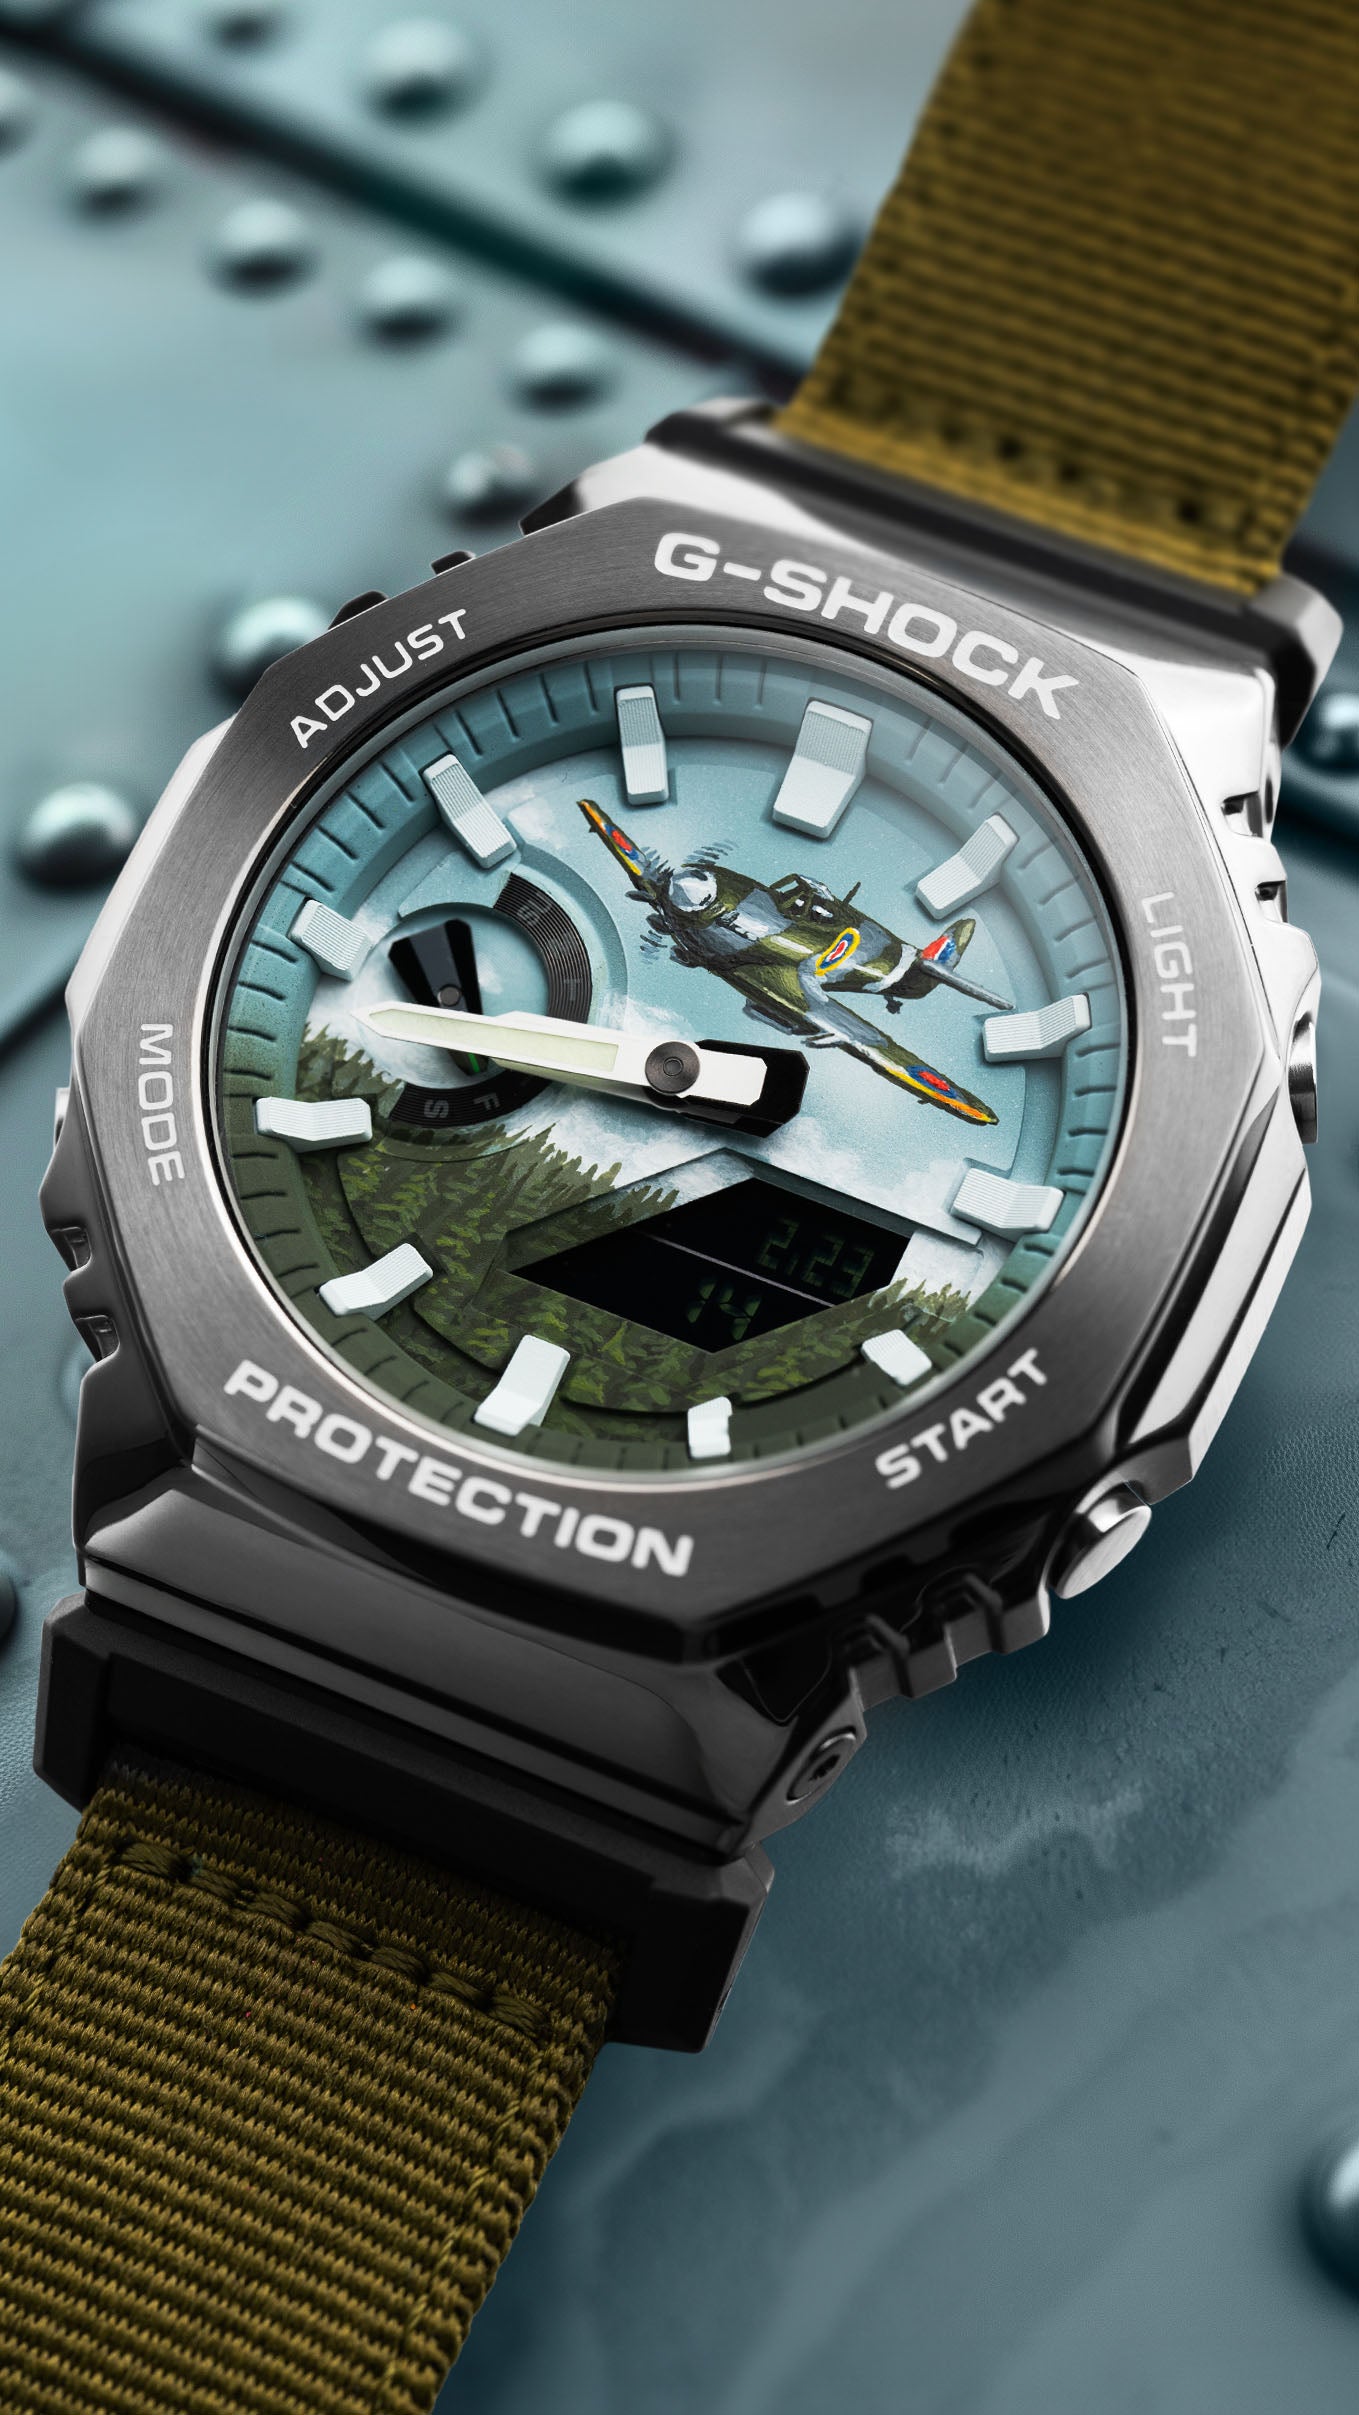 Limited edition G-Shock CasiOak Spitfire watch with sky hues and aviation legacy craftsmanship